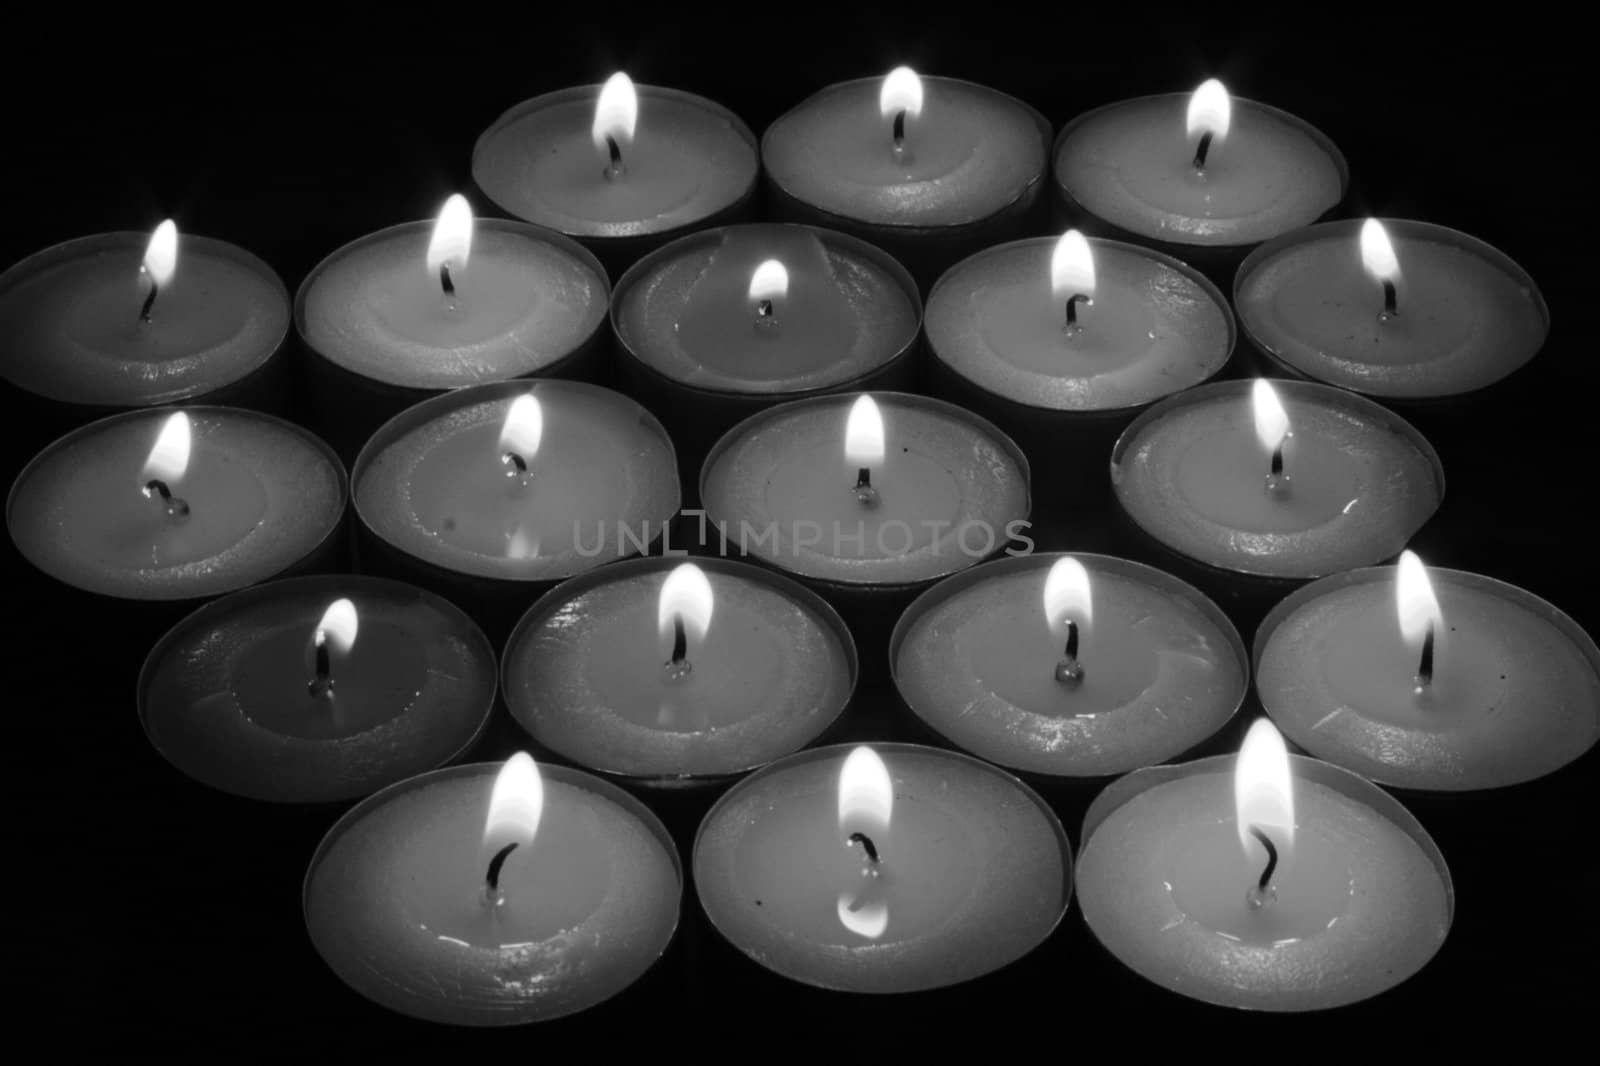 candles by noah1974